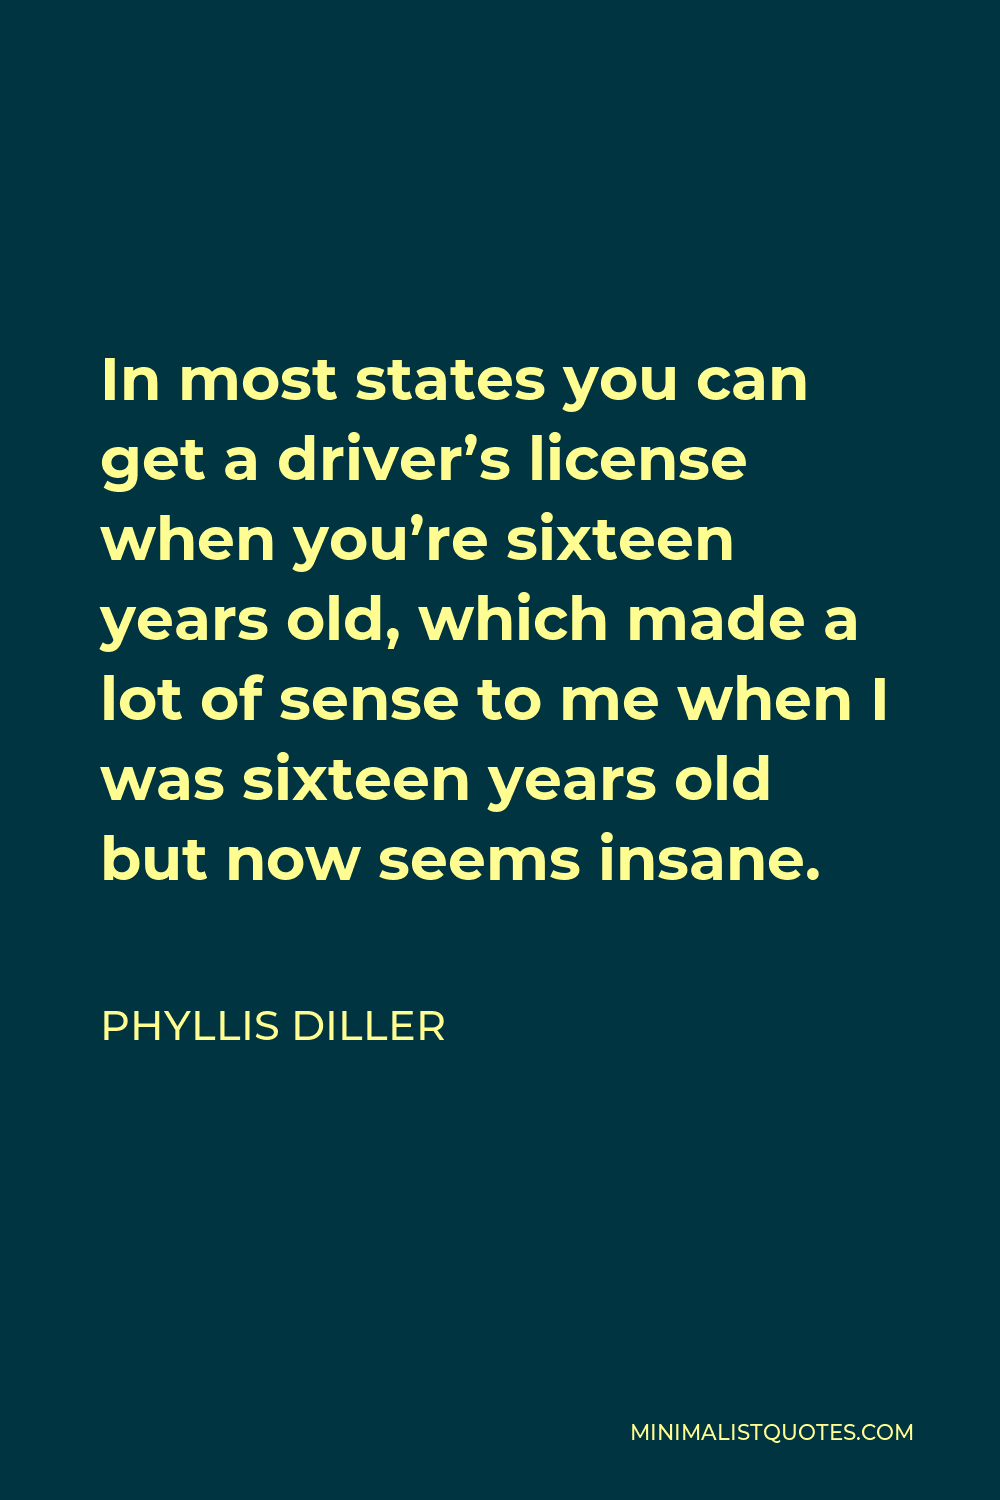 Phyllis Diller Quote - In most states you can get a driver’s license when you’re sixteen years old, which made a lot of sense to me when I was sixteen years old but now seems insane.